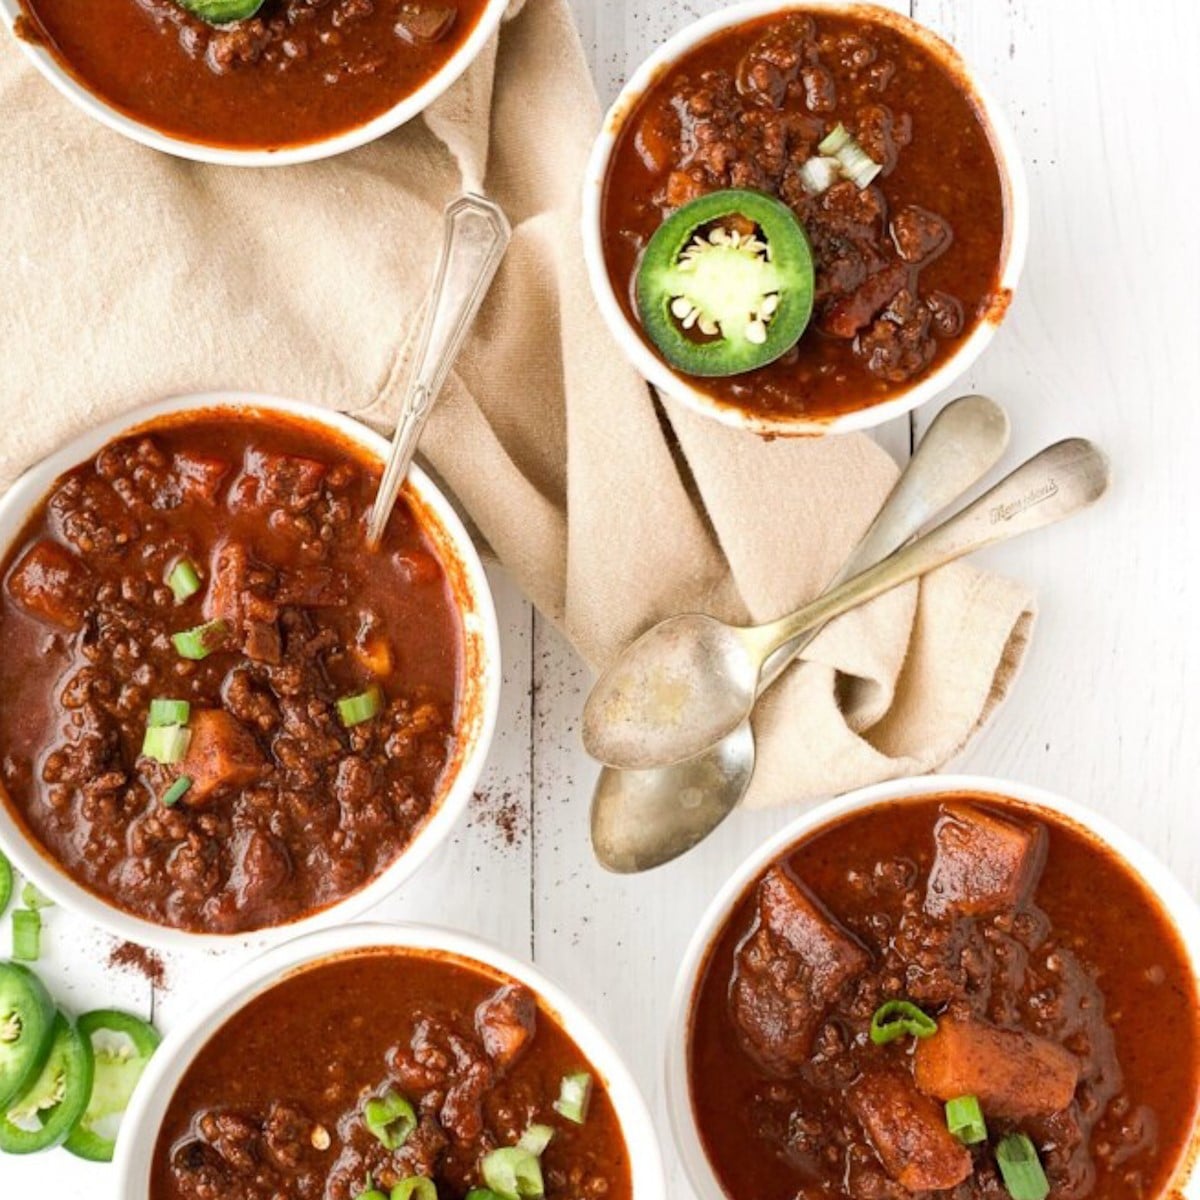 Bowls of hearty and thick chili with no beans.